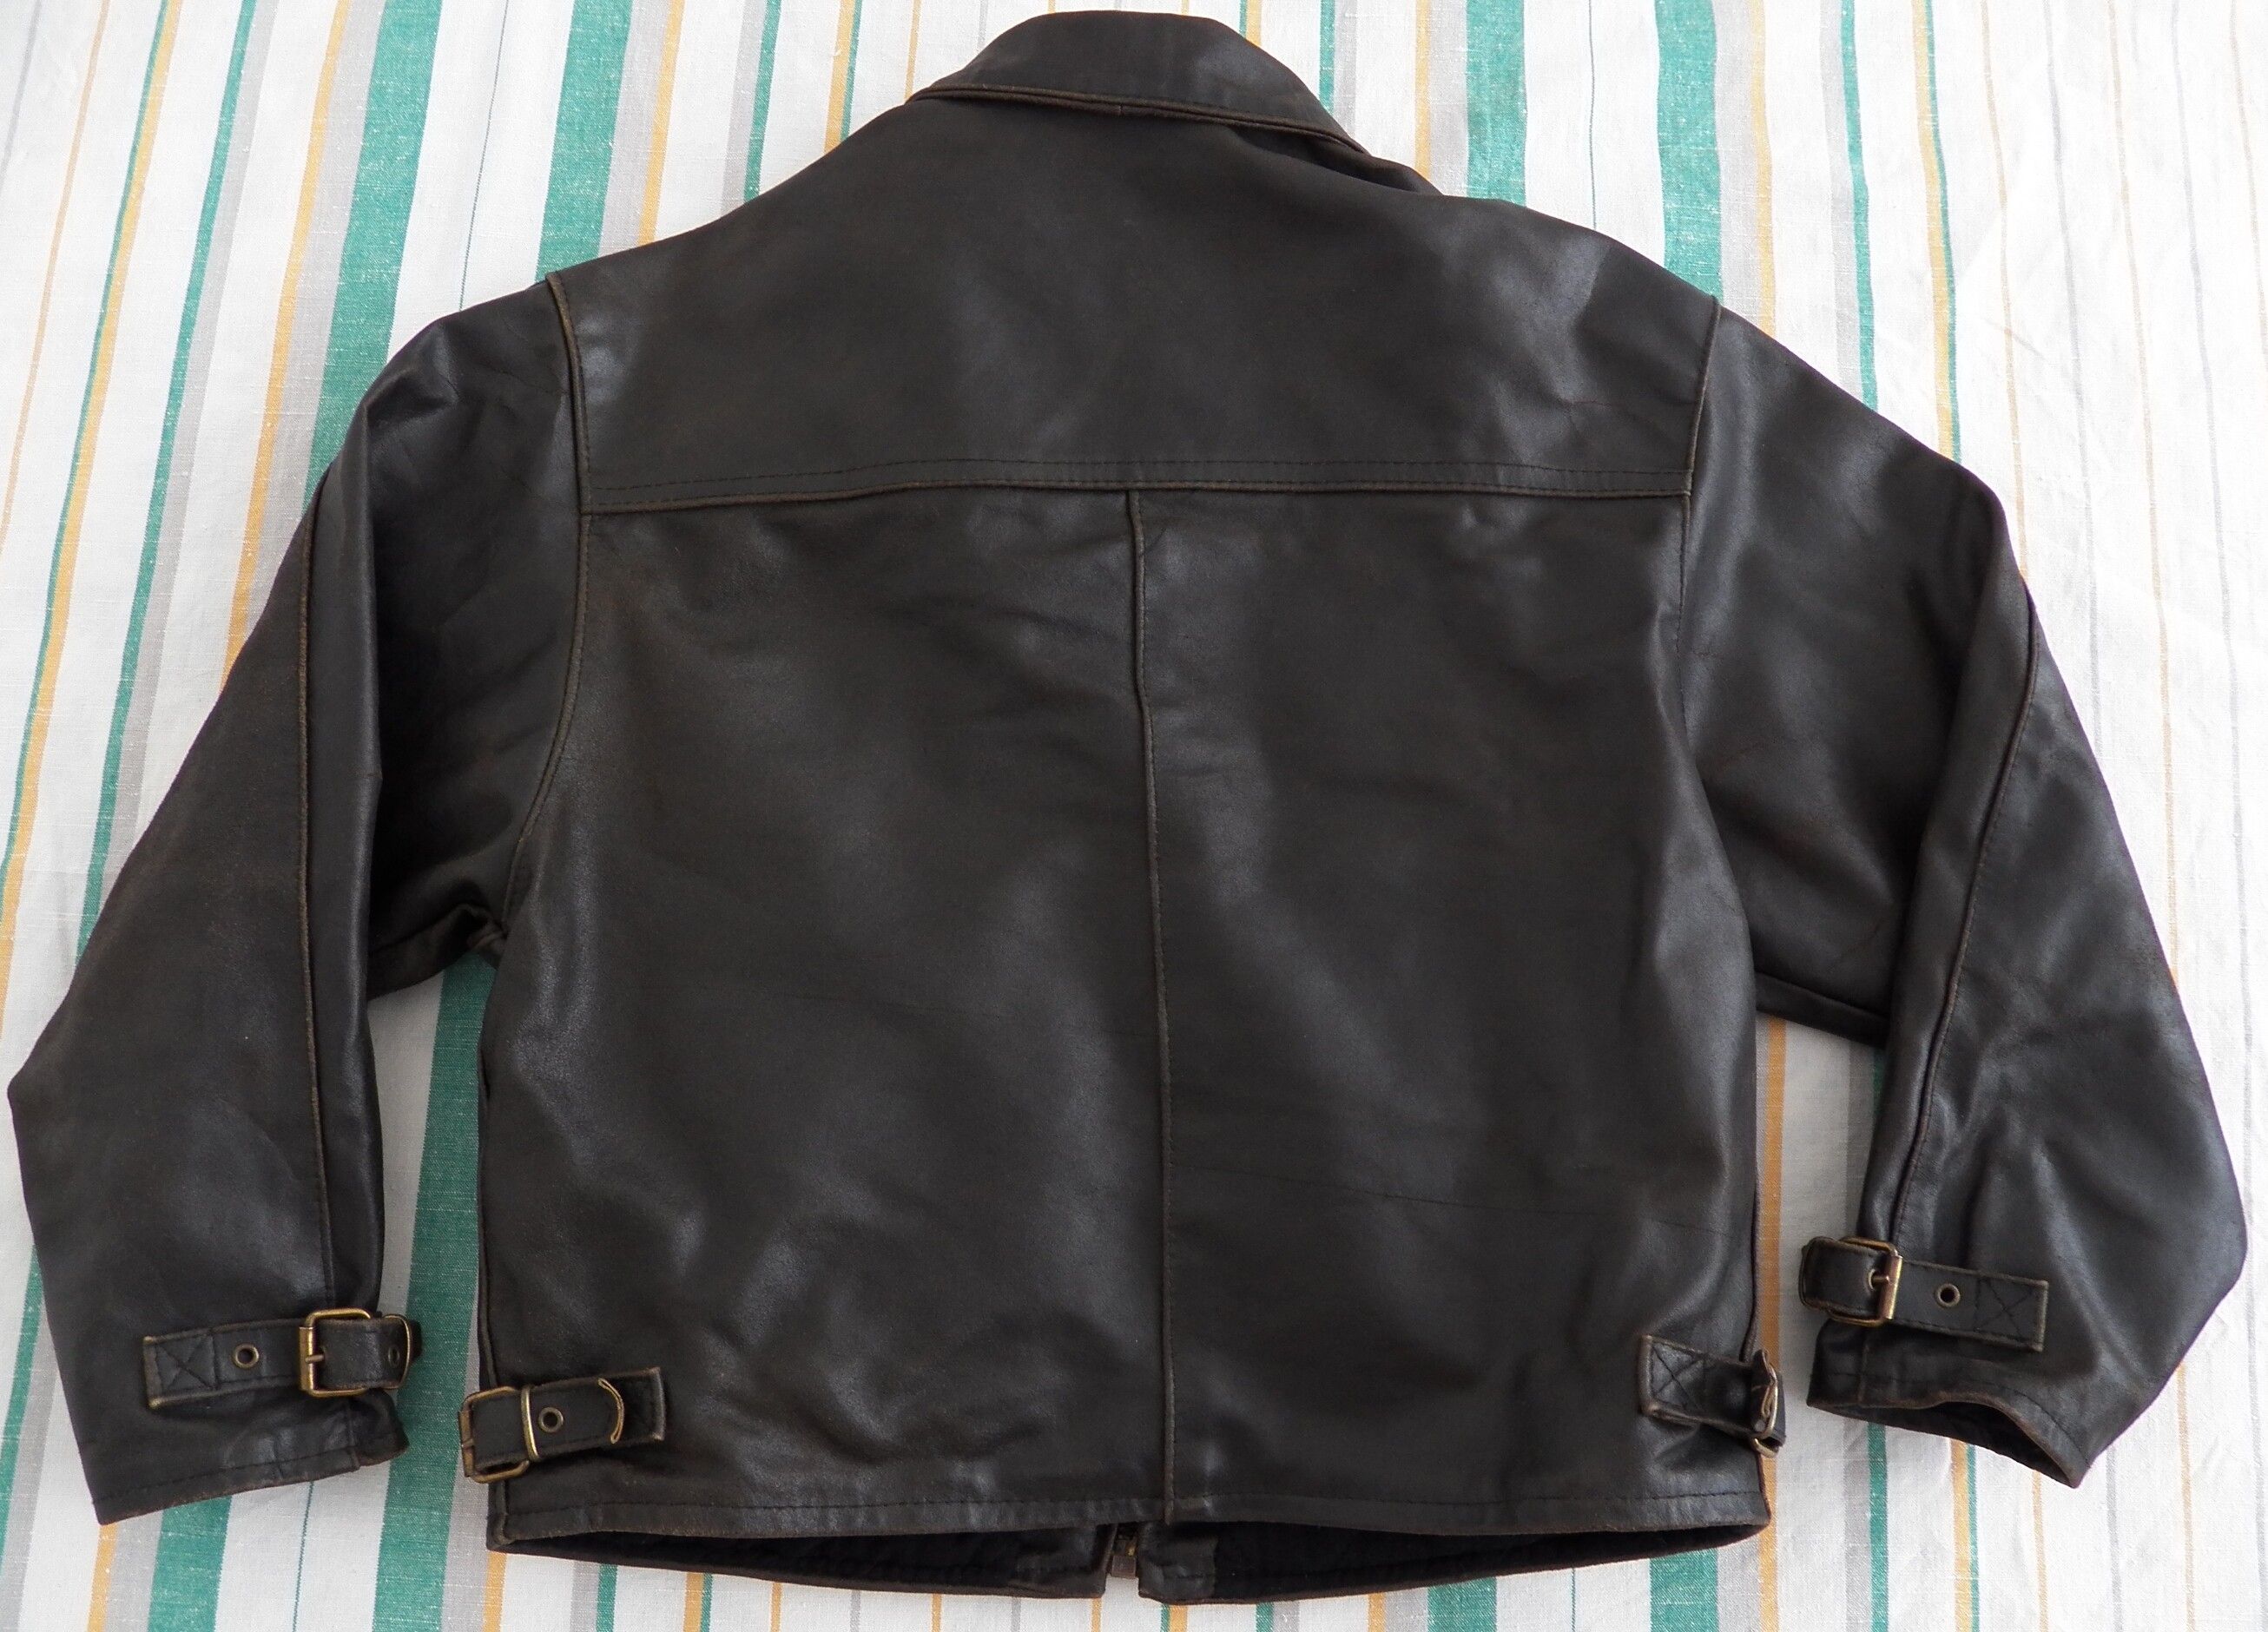 Vintage Firenze 1957 Vintage Raw Leather Jacket Brown Small Size US S / EU 44-46 / 1 - 6 Thumbnail